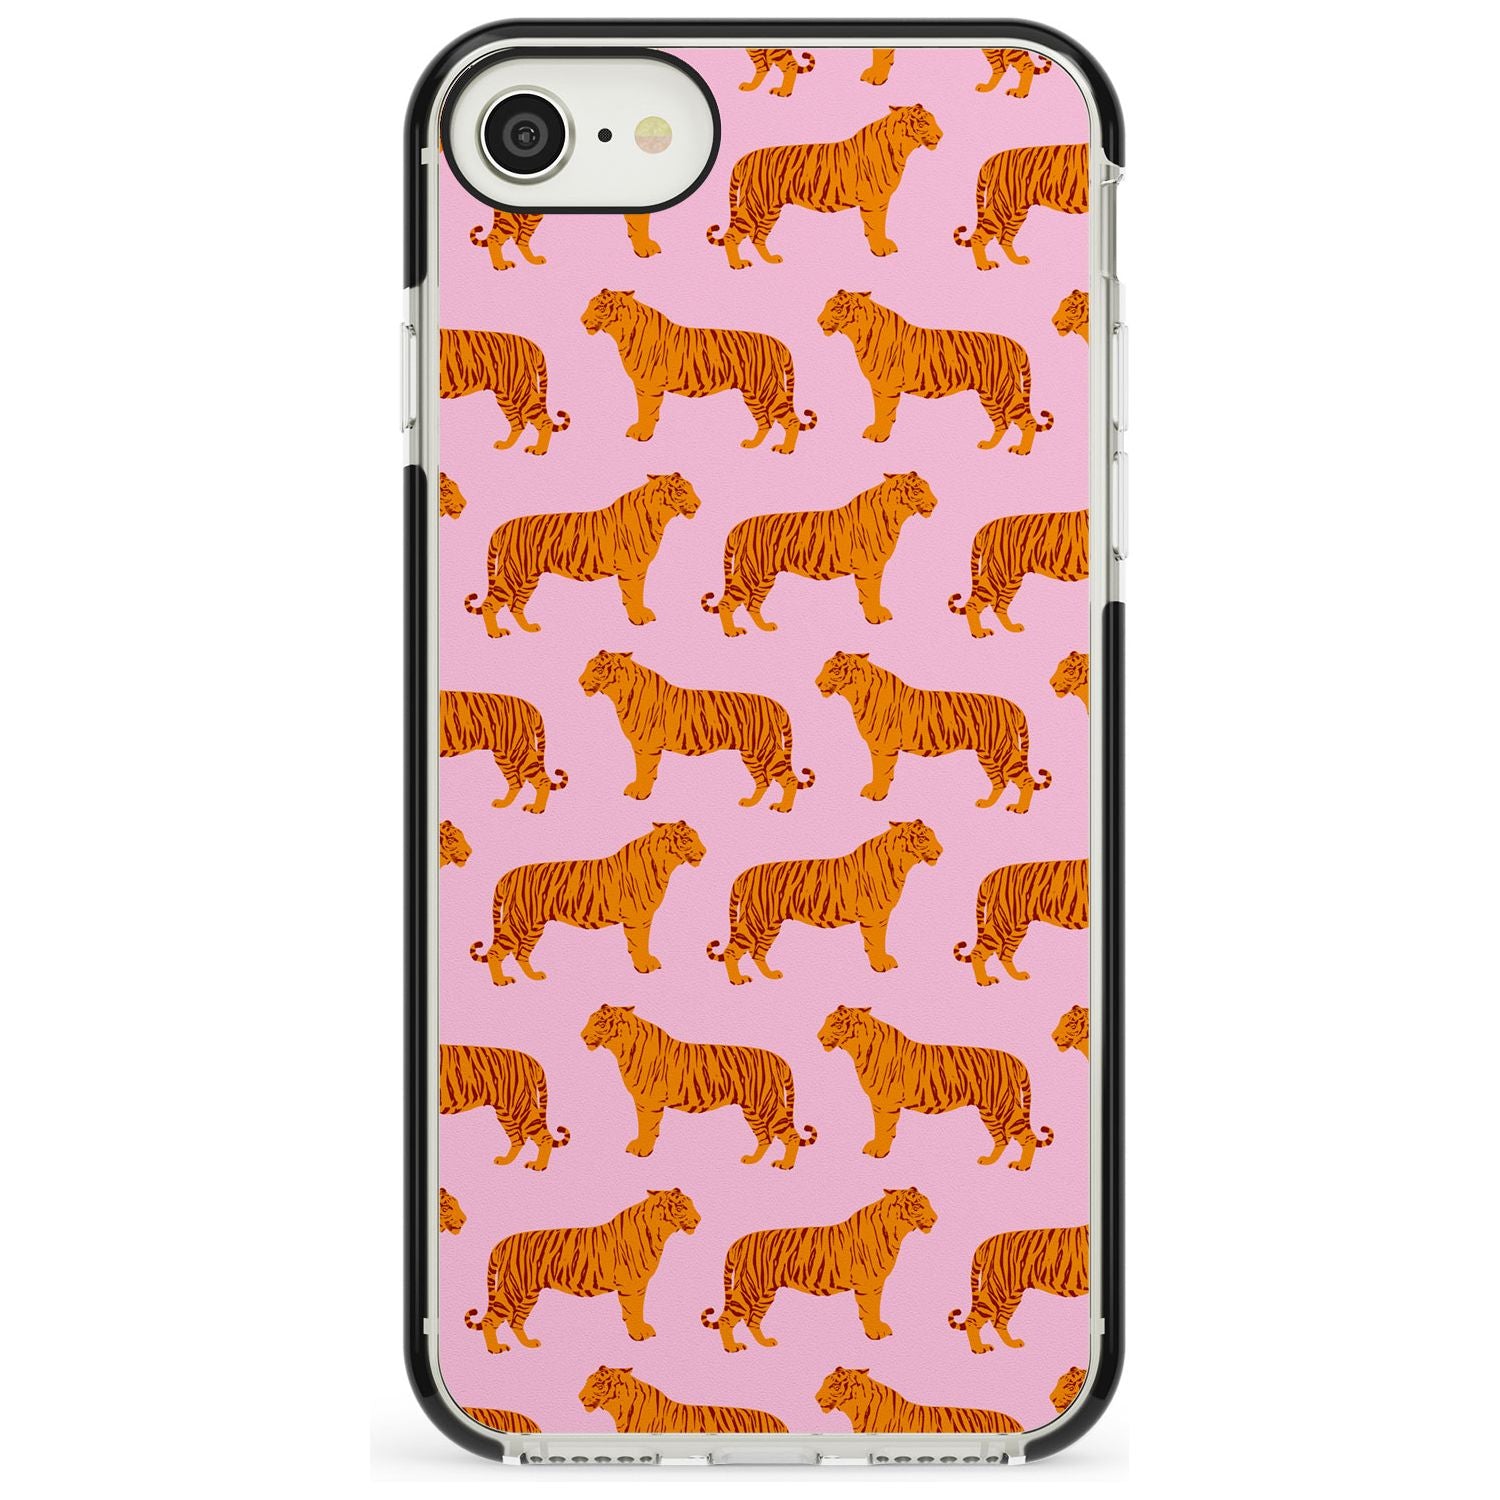 Tigers on Pink Pattern Black Impact Phone Case for iPhone SE 8 7 Plus